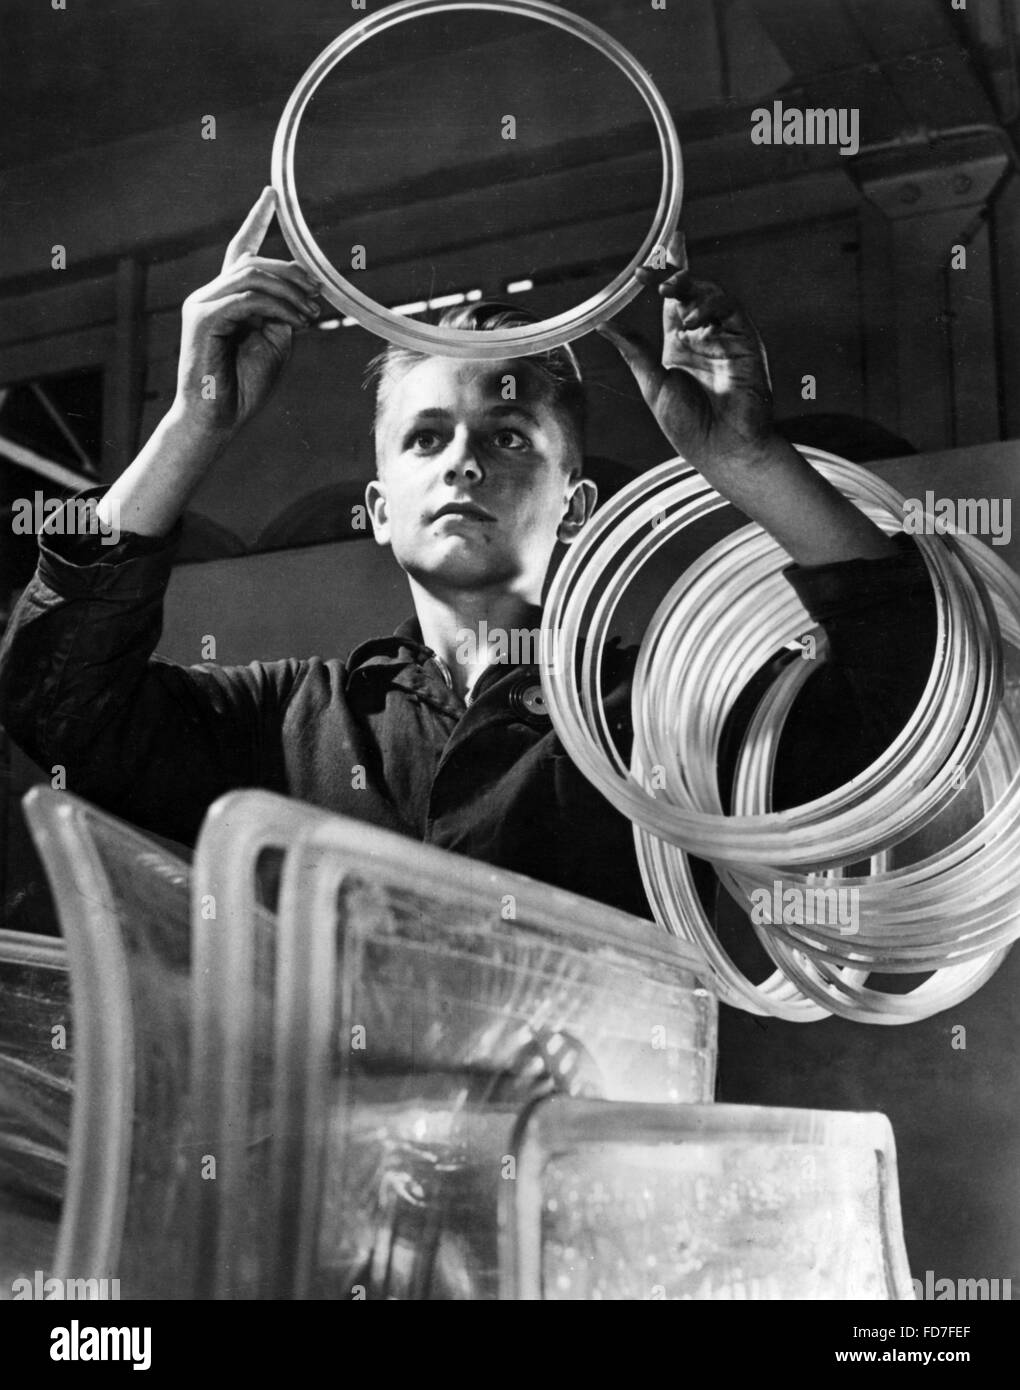 Adolescent in the Junkers plant, 1941 Stock Photo